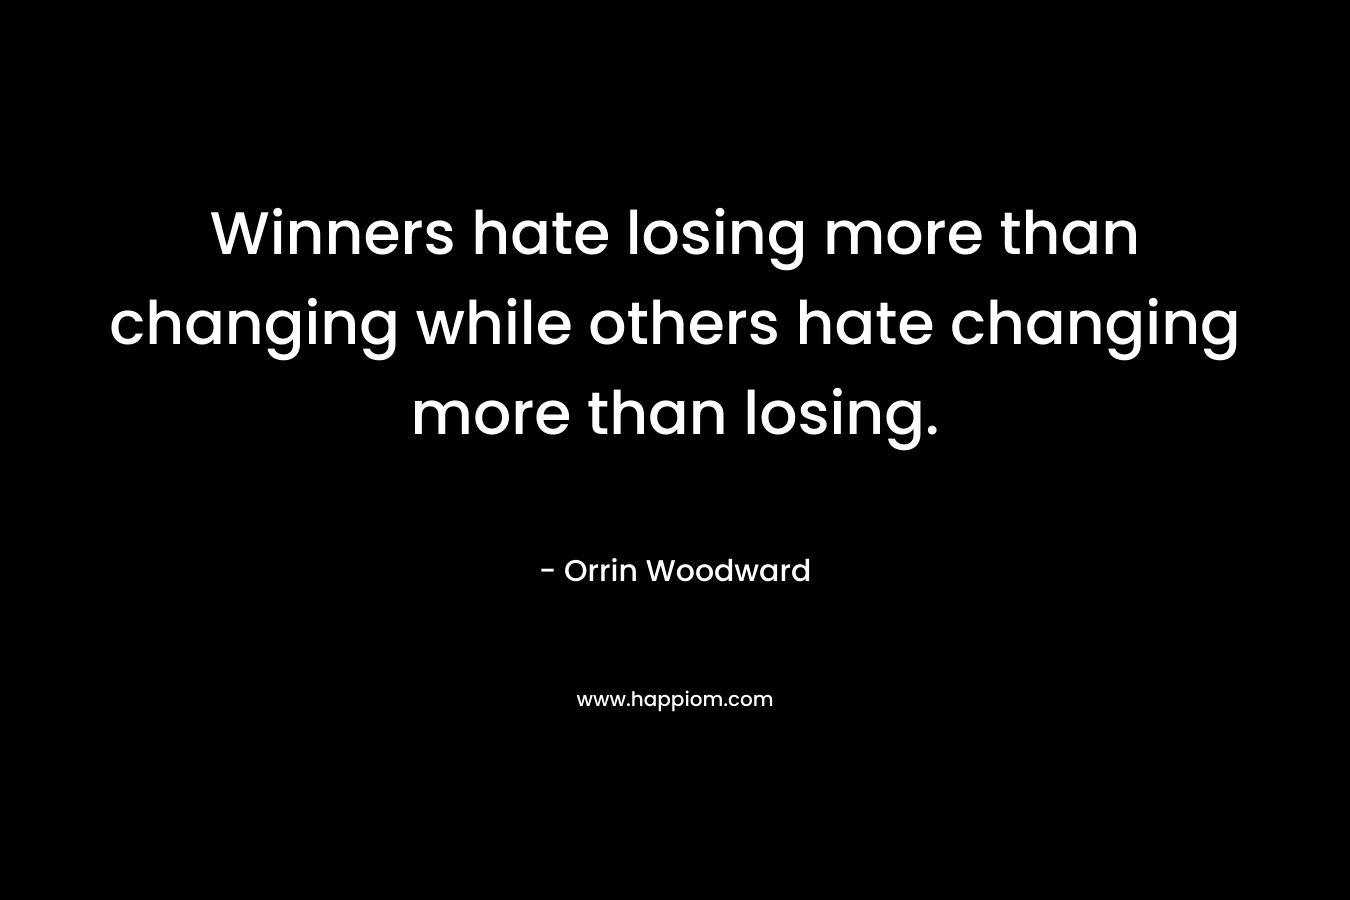 Winners hate losing more than changing while others hate changing more than losing. – Orrin Woodward